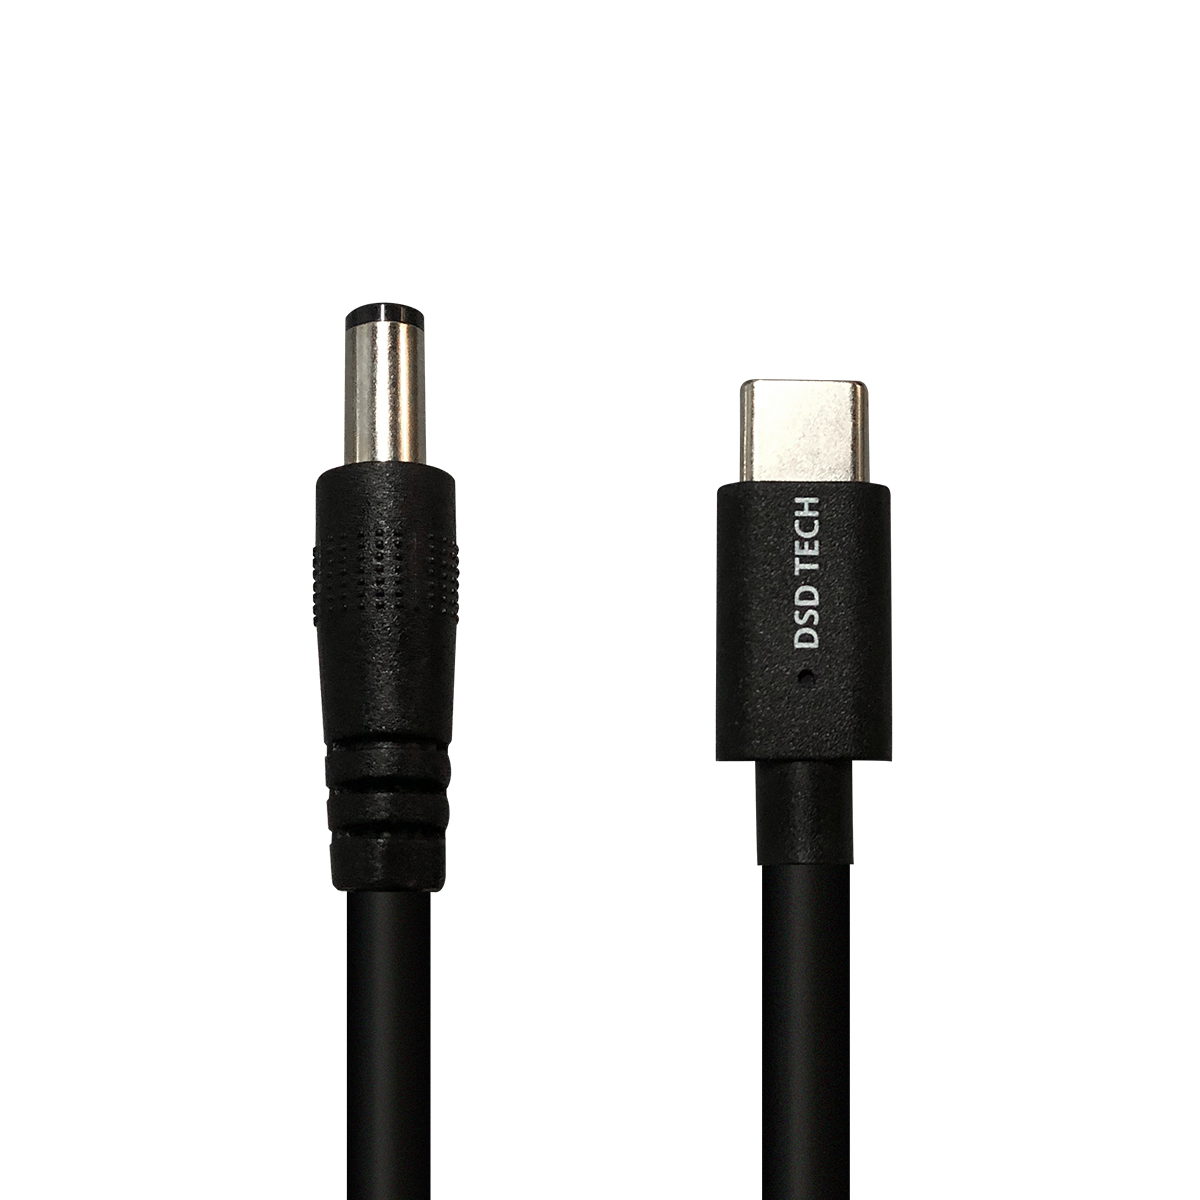 SH-CP12B USB Type C PD to DC Power Cable